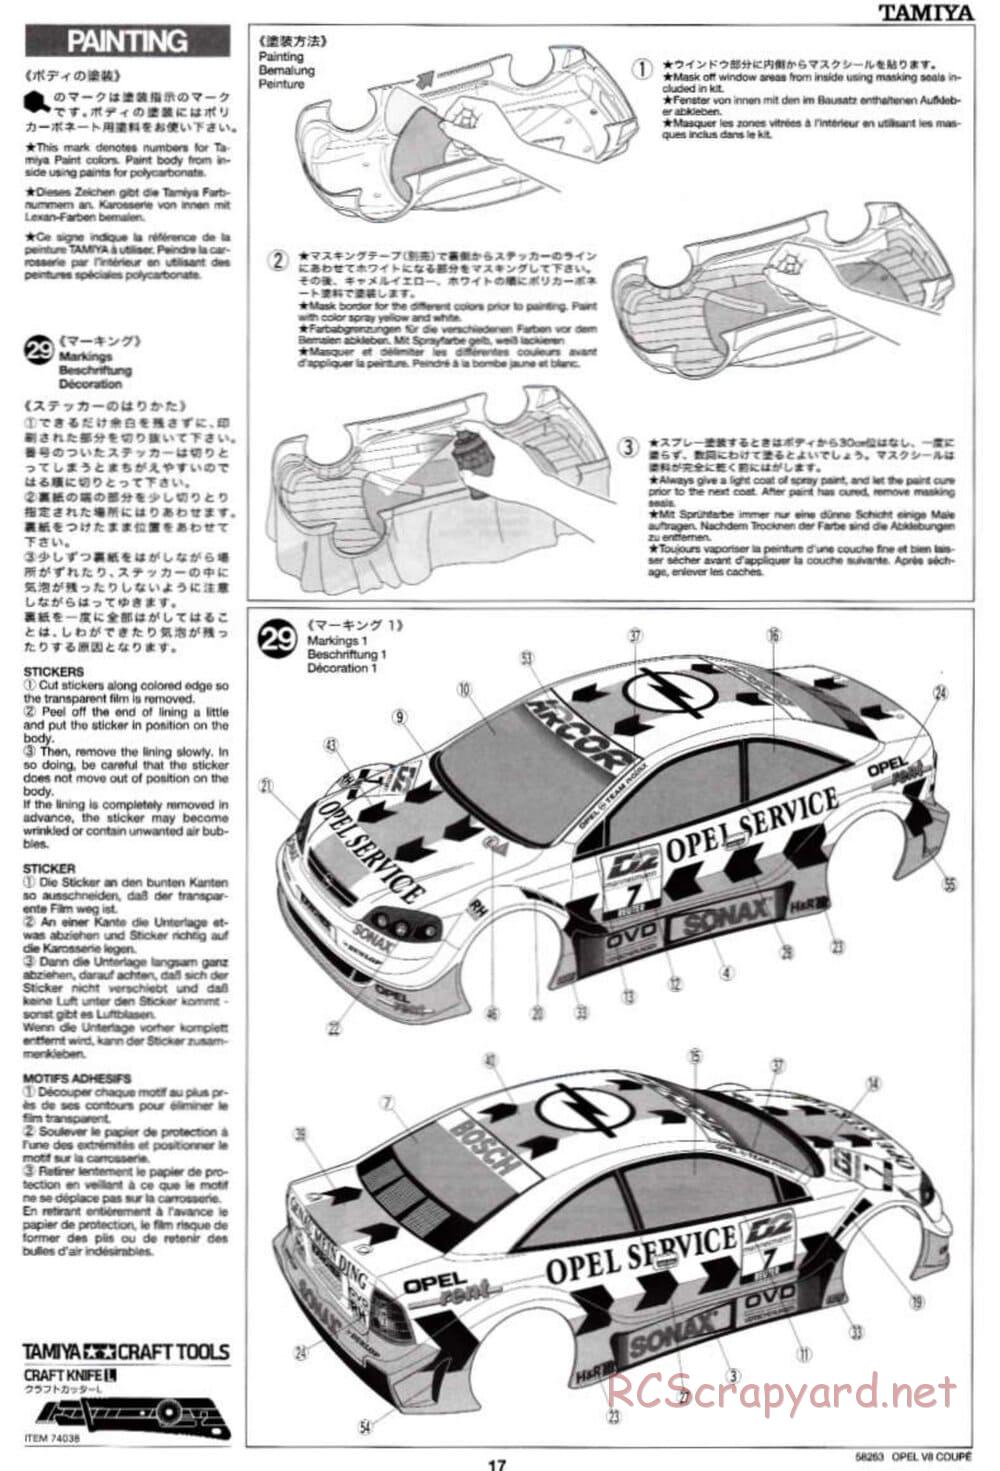 Tamiya - Opel V8 Coupe - TL-01 Chassis - Manual - Page 17